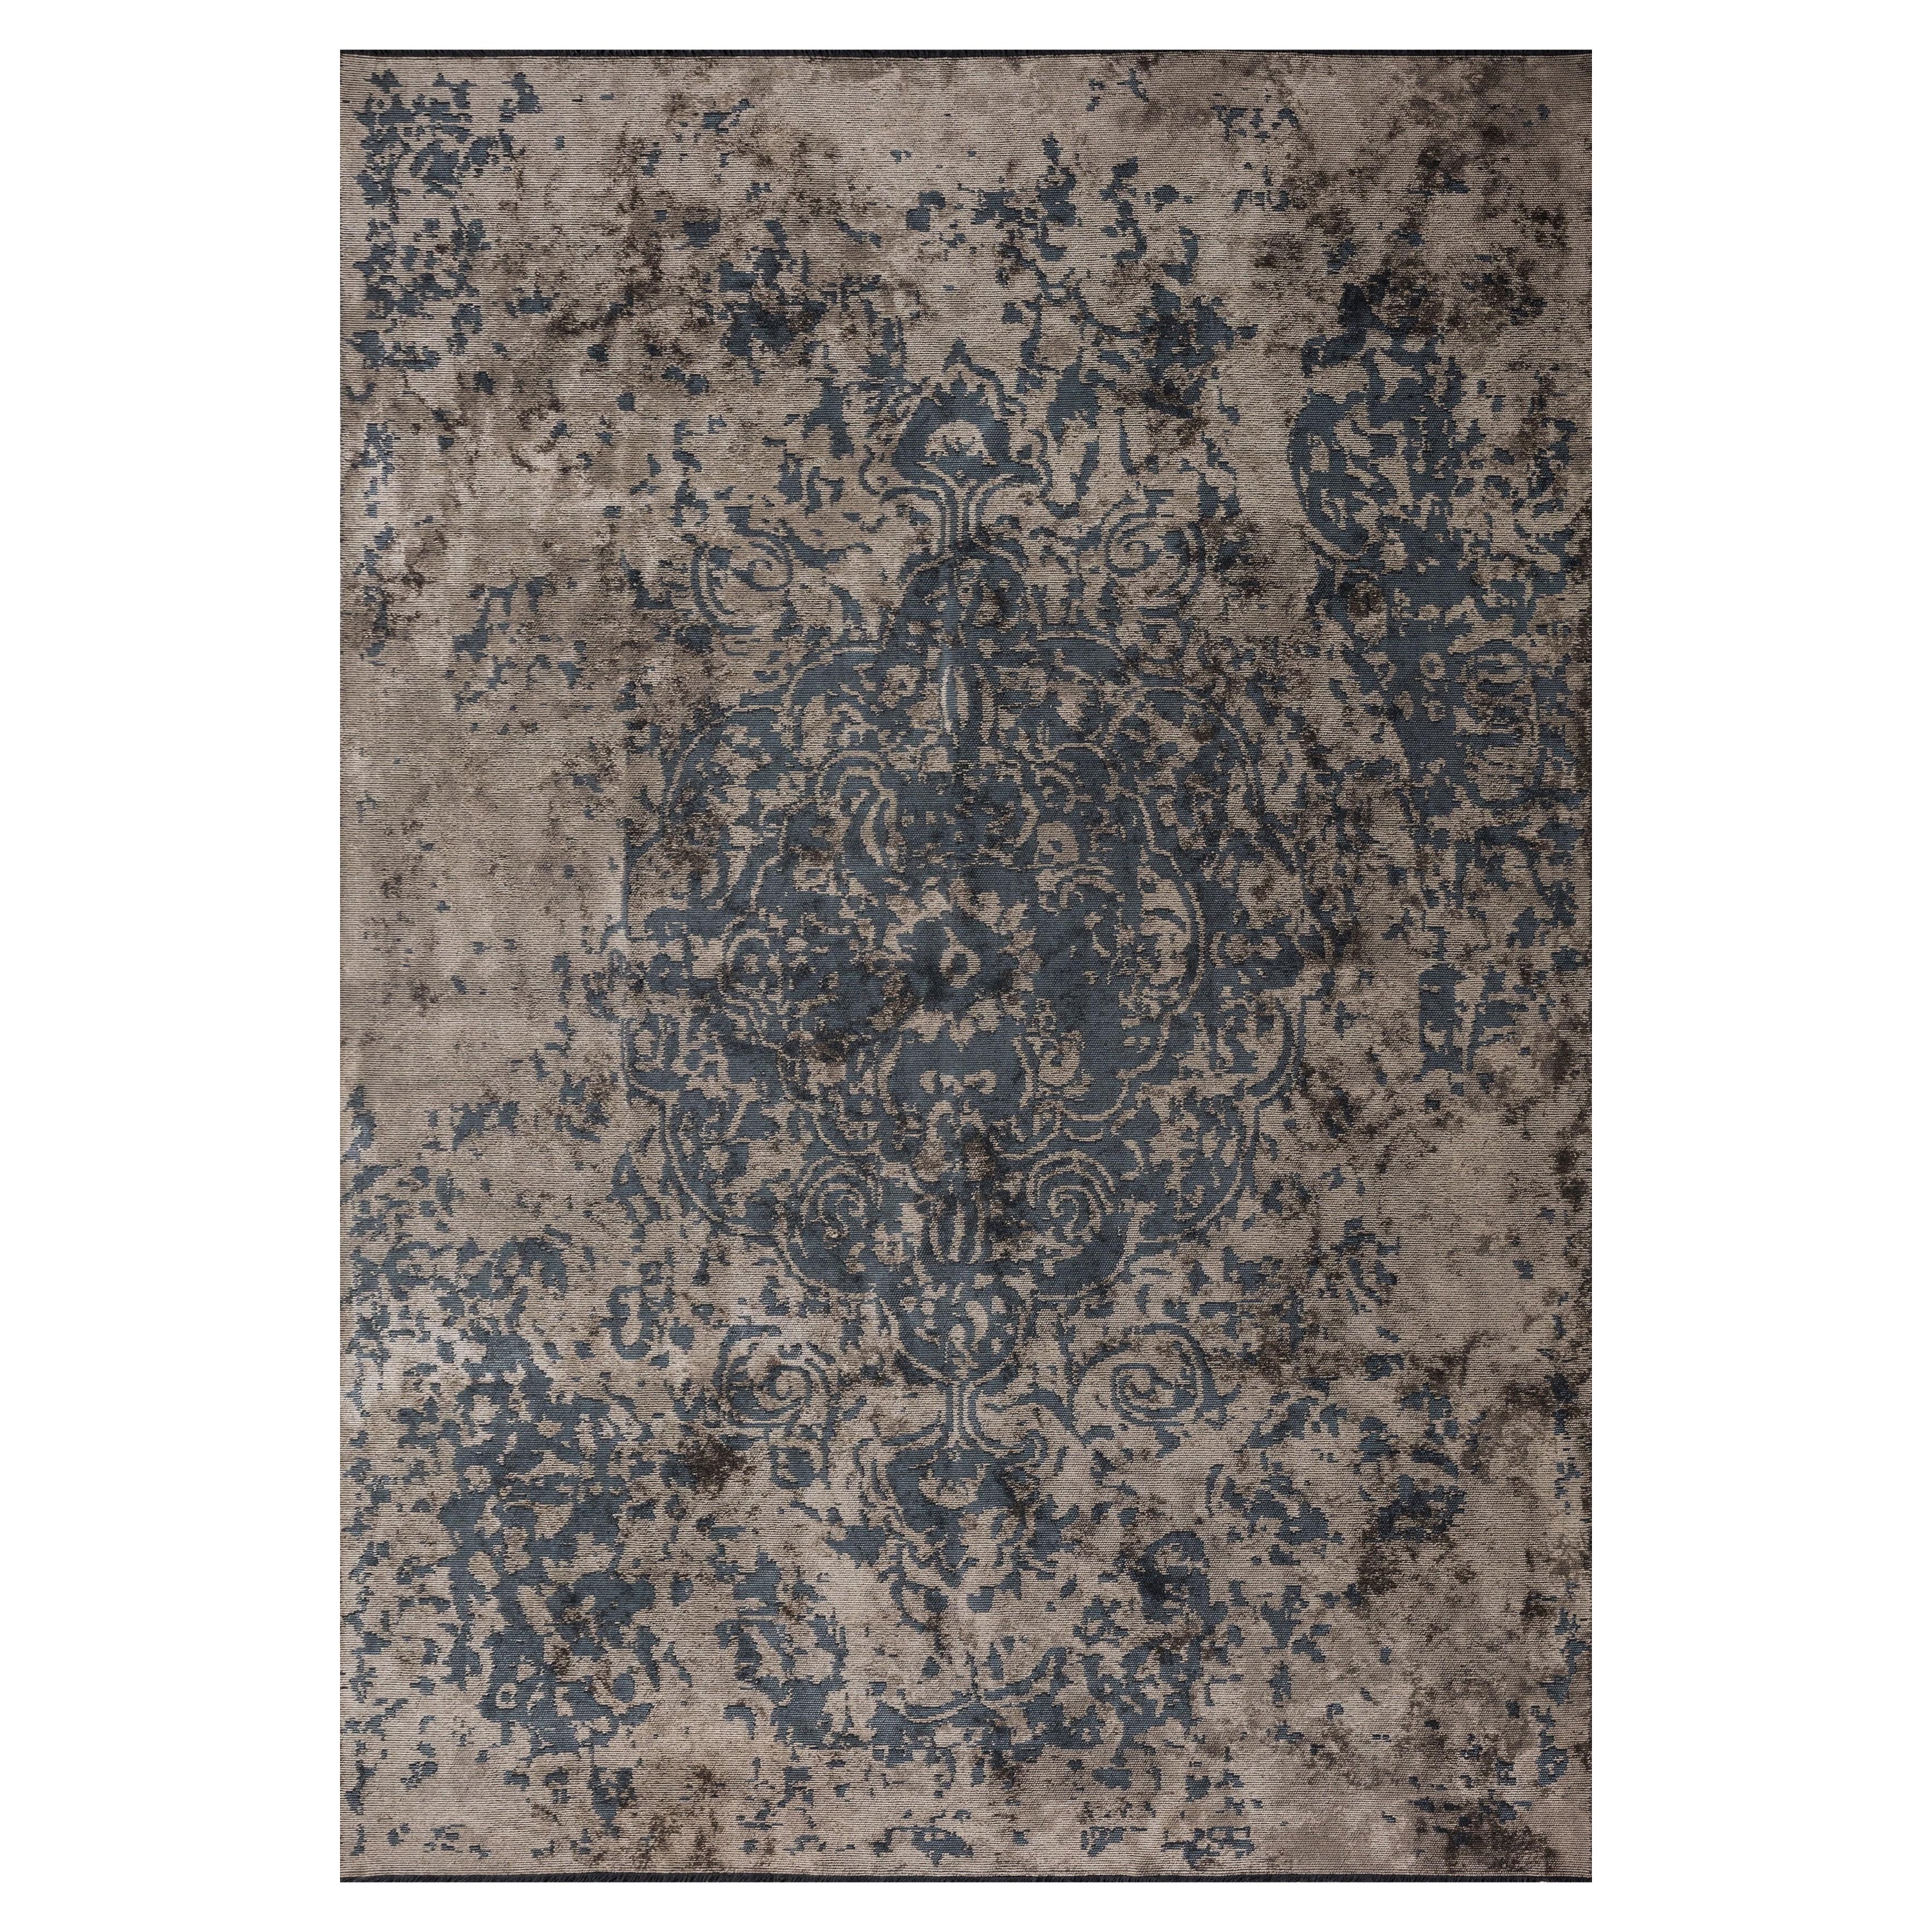 For Sale:  (Beige) Contemporary Damask Luxury Hand-Finished Area Rug